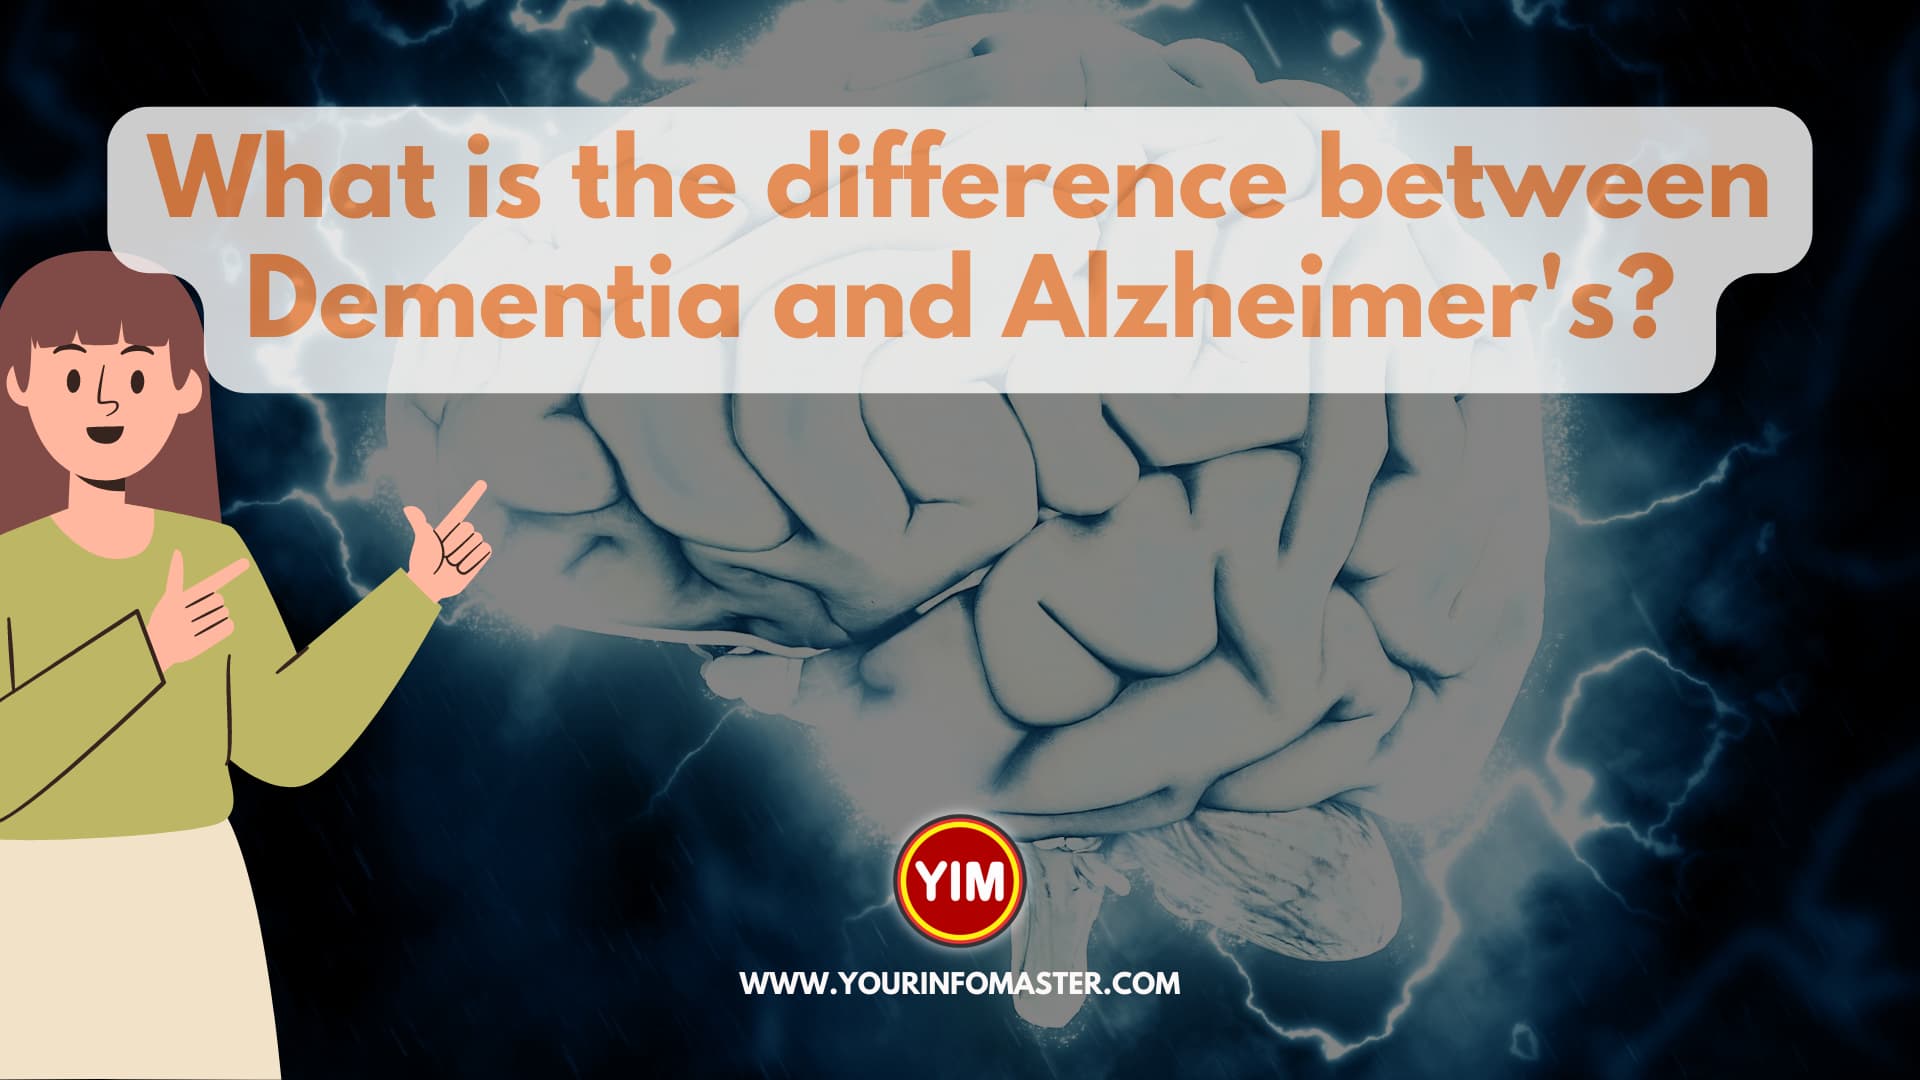 What is the difference between Dementia and Alzheimer's